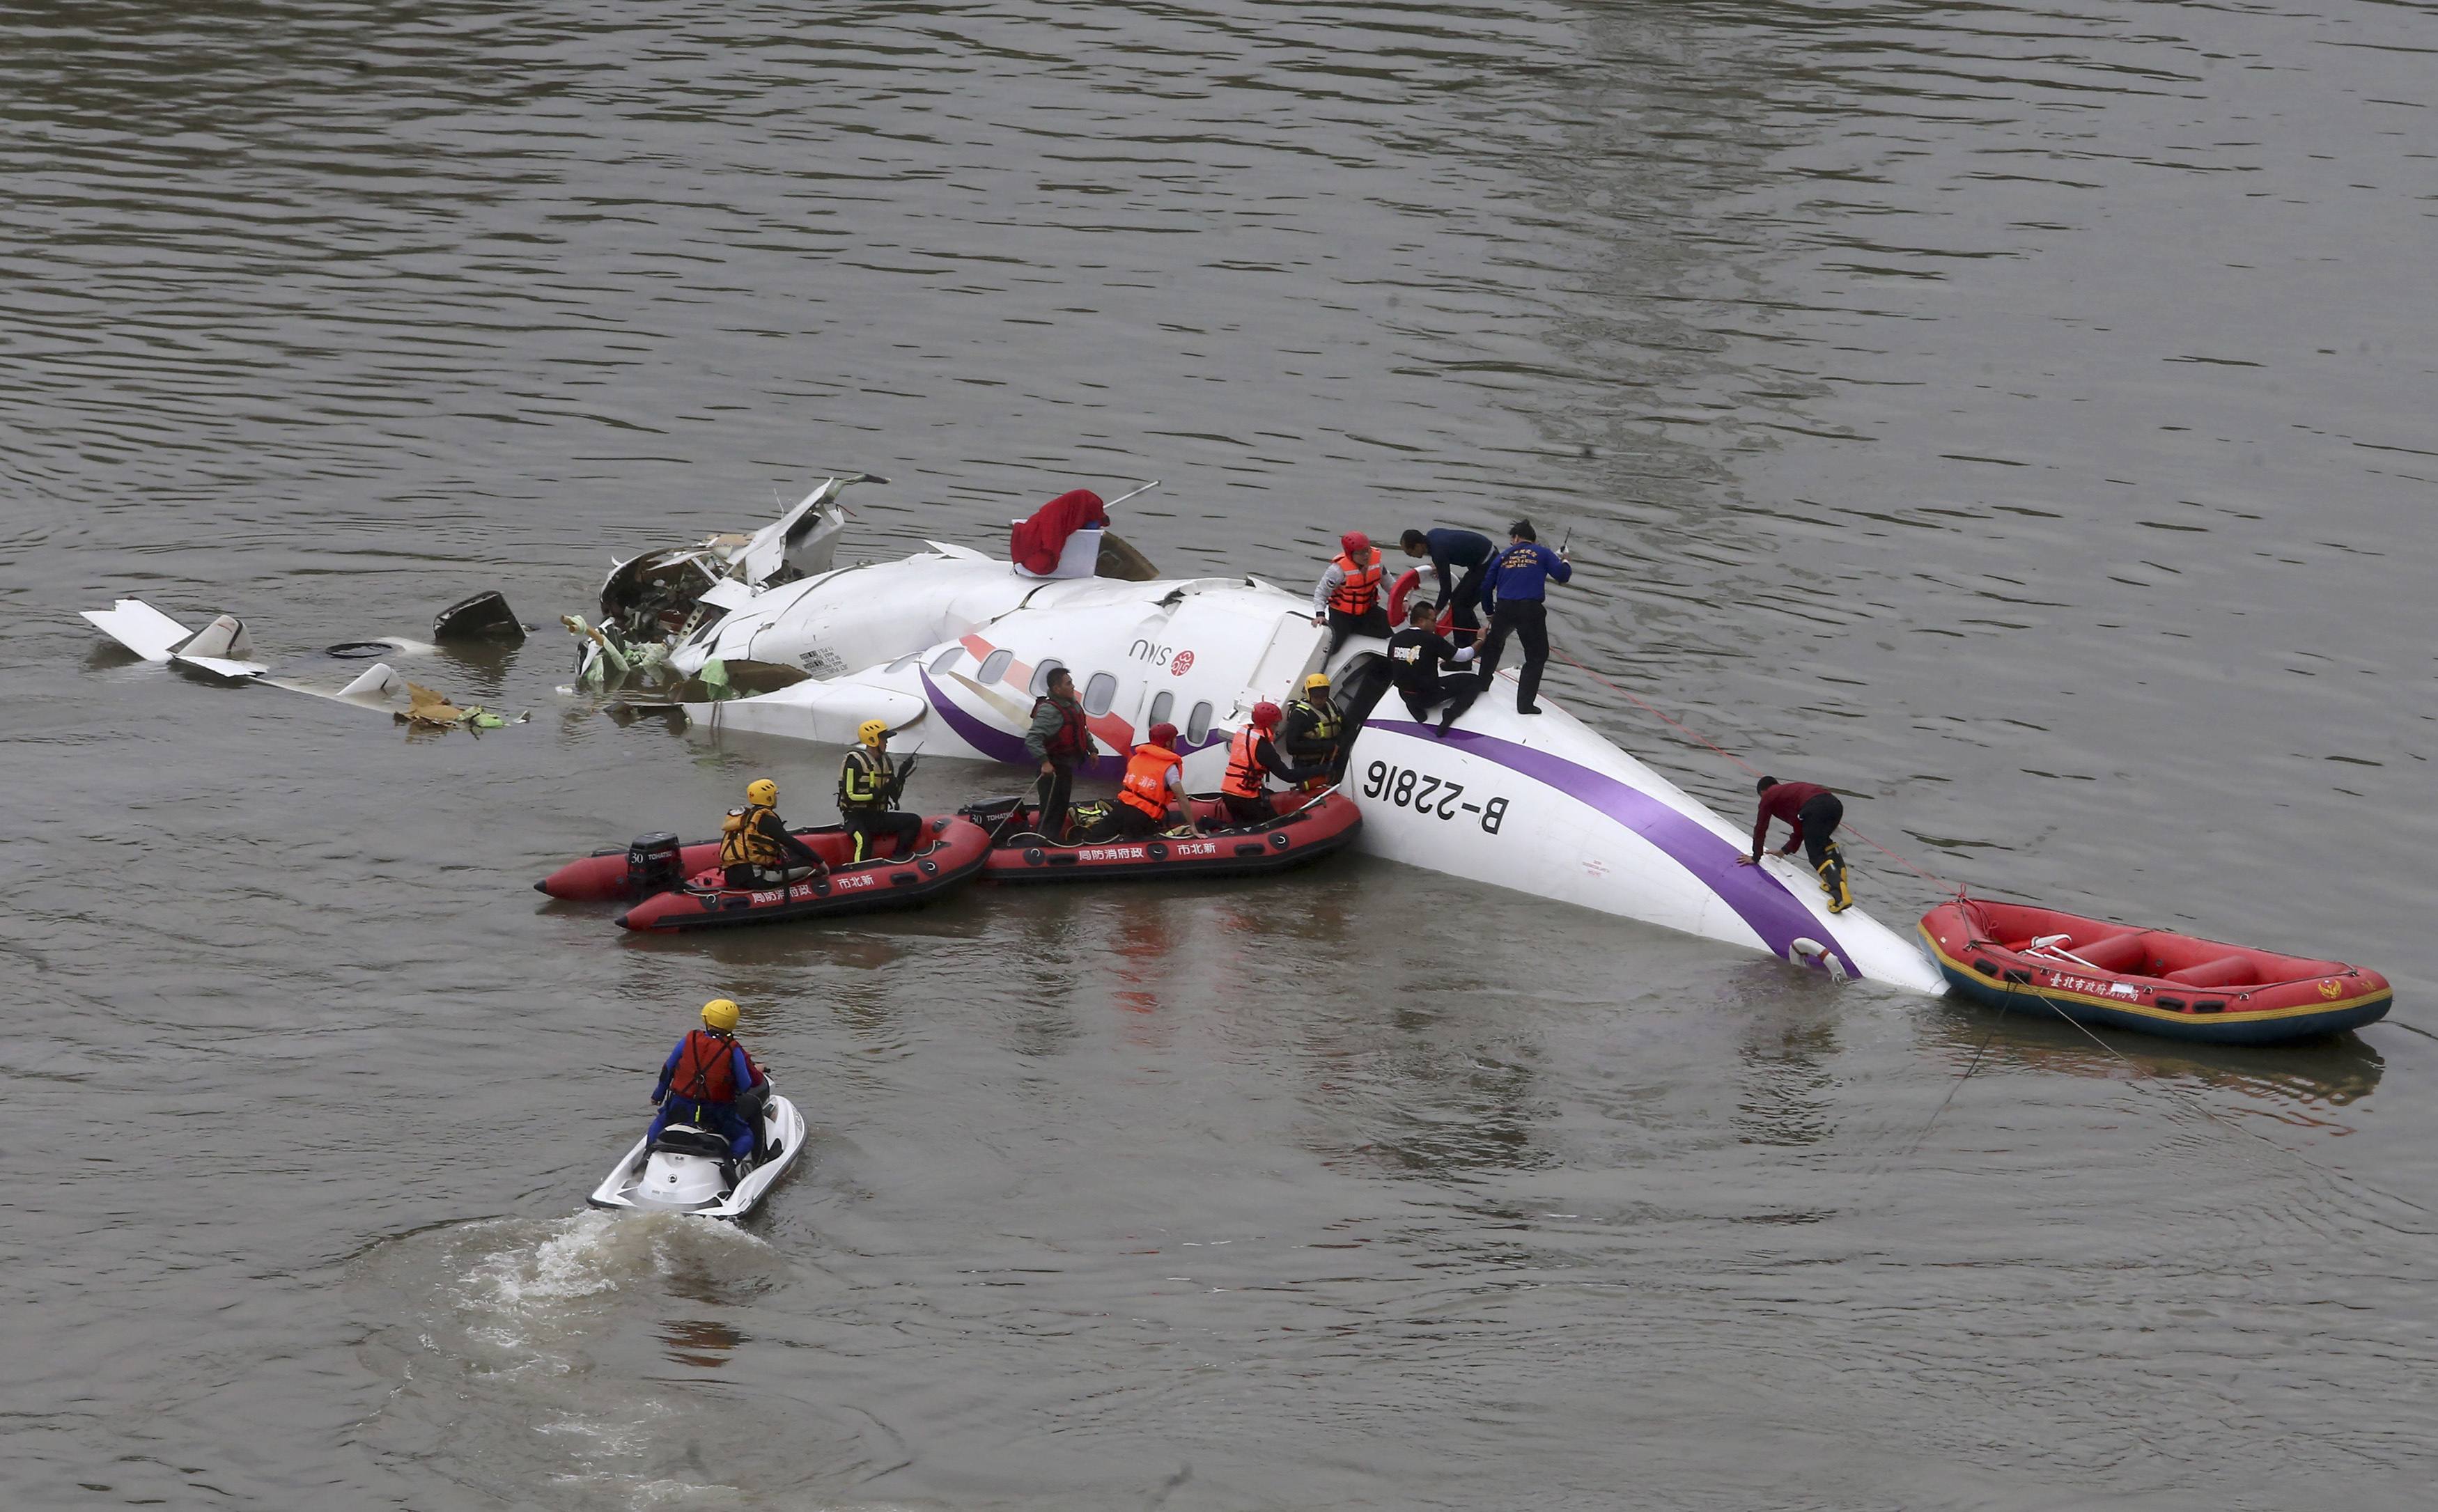 At least 11 dead as Taiwan plane cartwheels into river on take-off